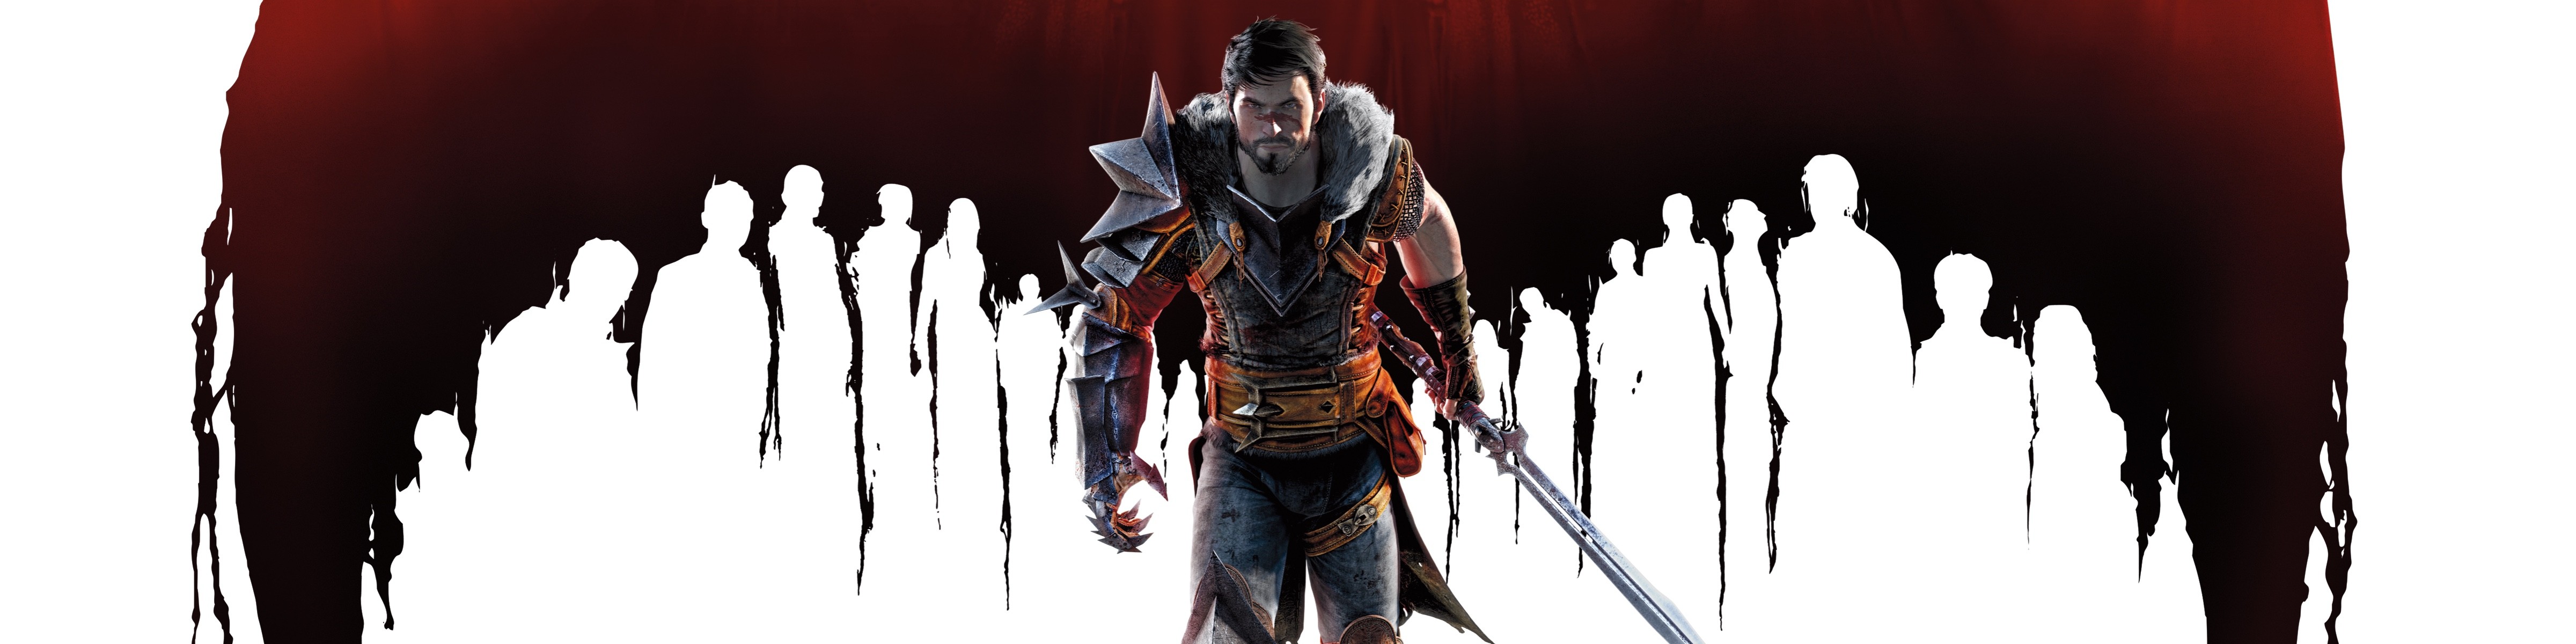 download dragon age 2 all dlc for free